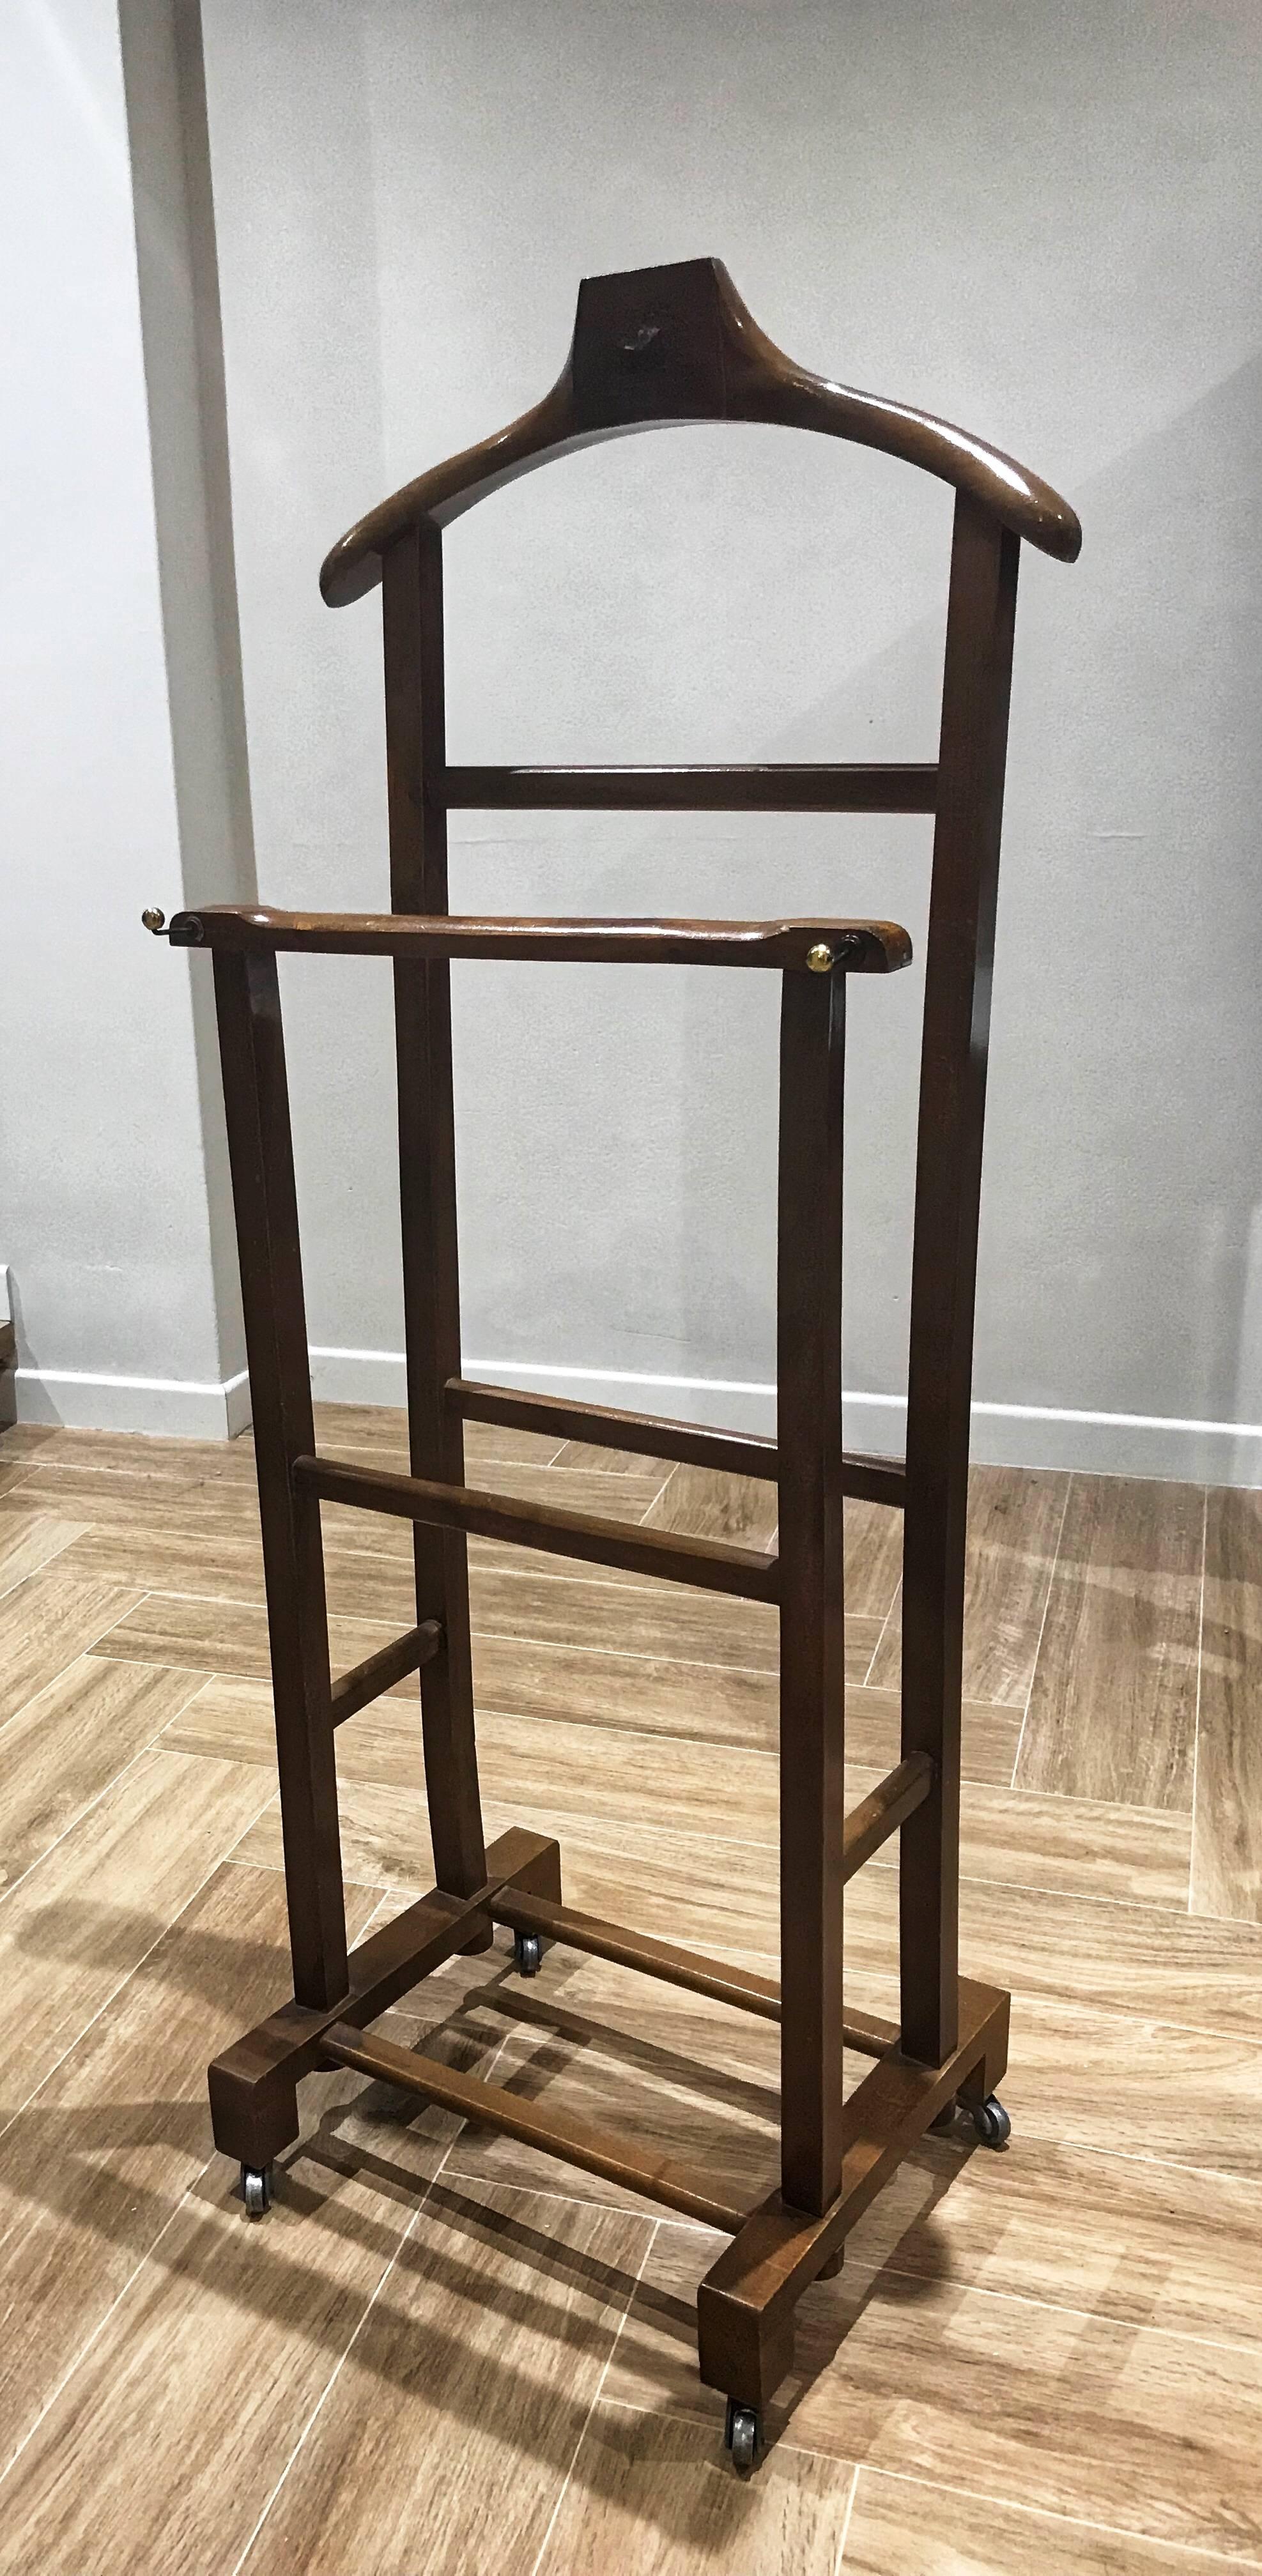 Stylish valet wood stand in very good condition, marked with the manufacturer’s label "APE".